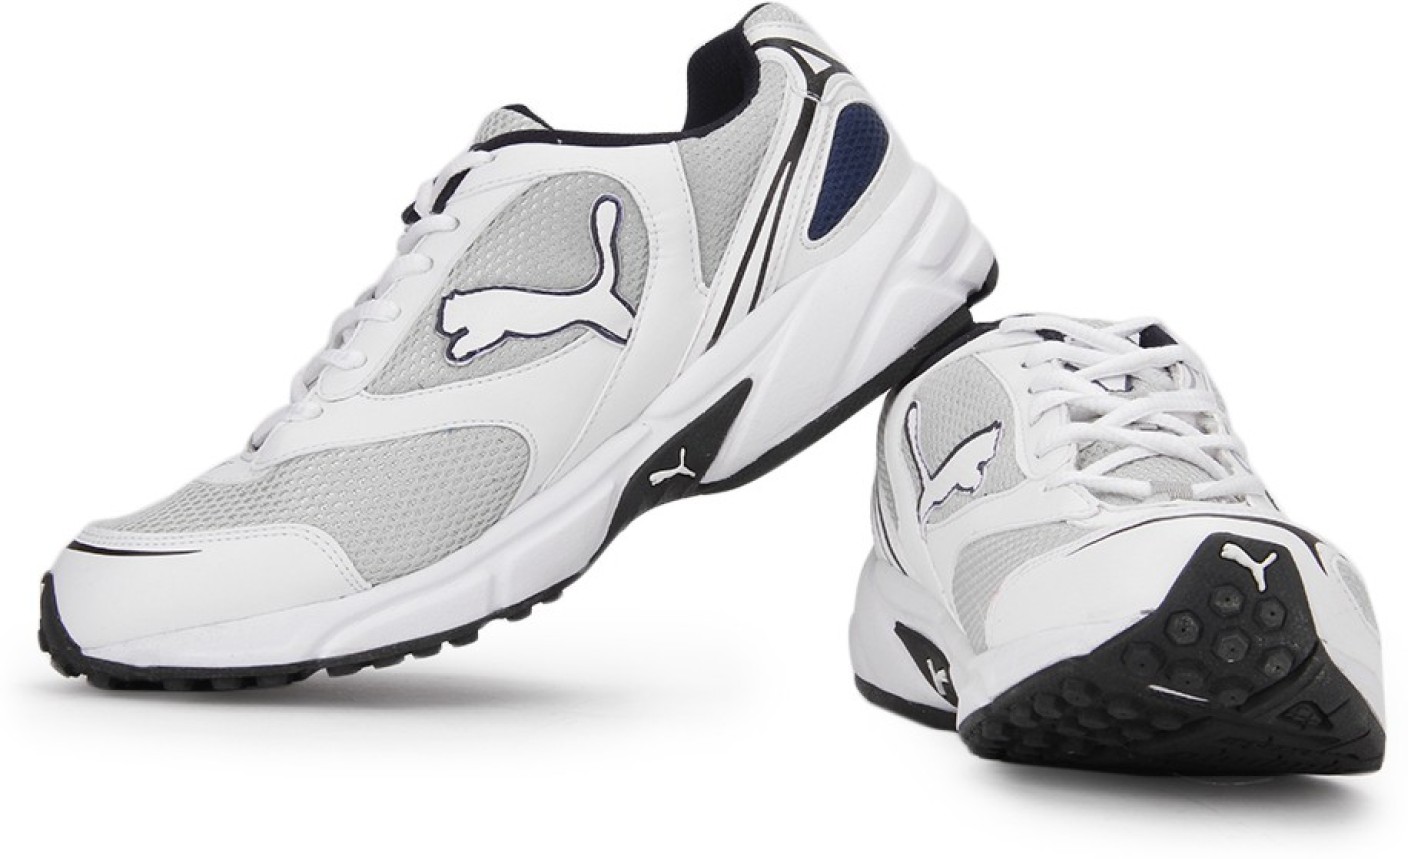 Puma Running Shoes For Men - Buy 08, White, Puma Silver, Peacoat Color ...